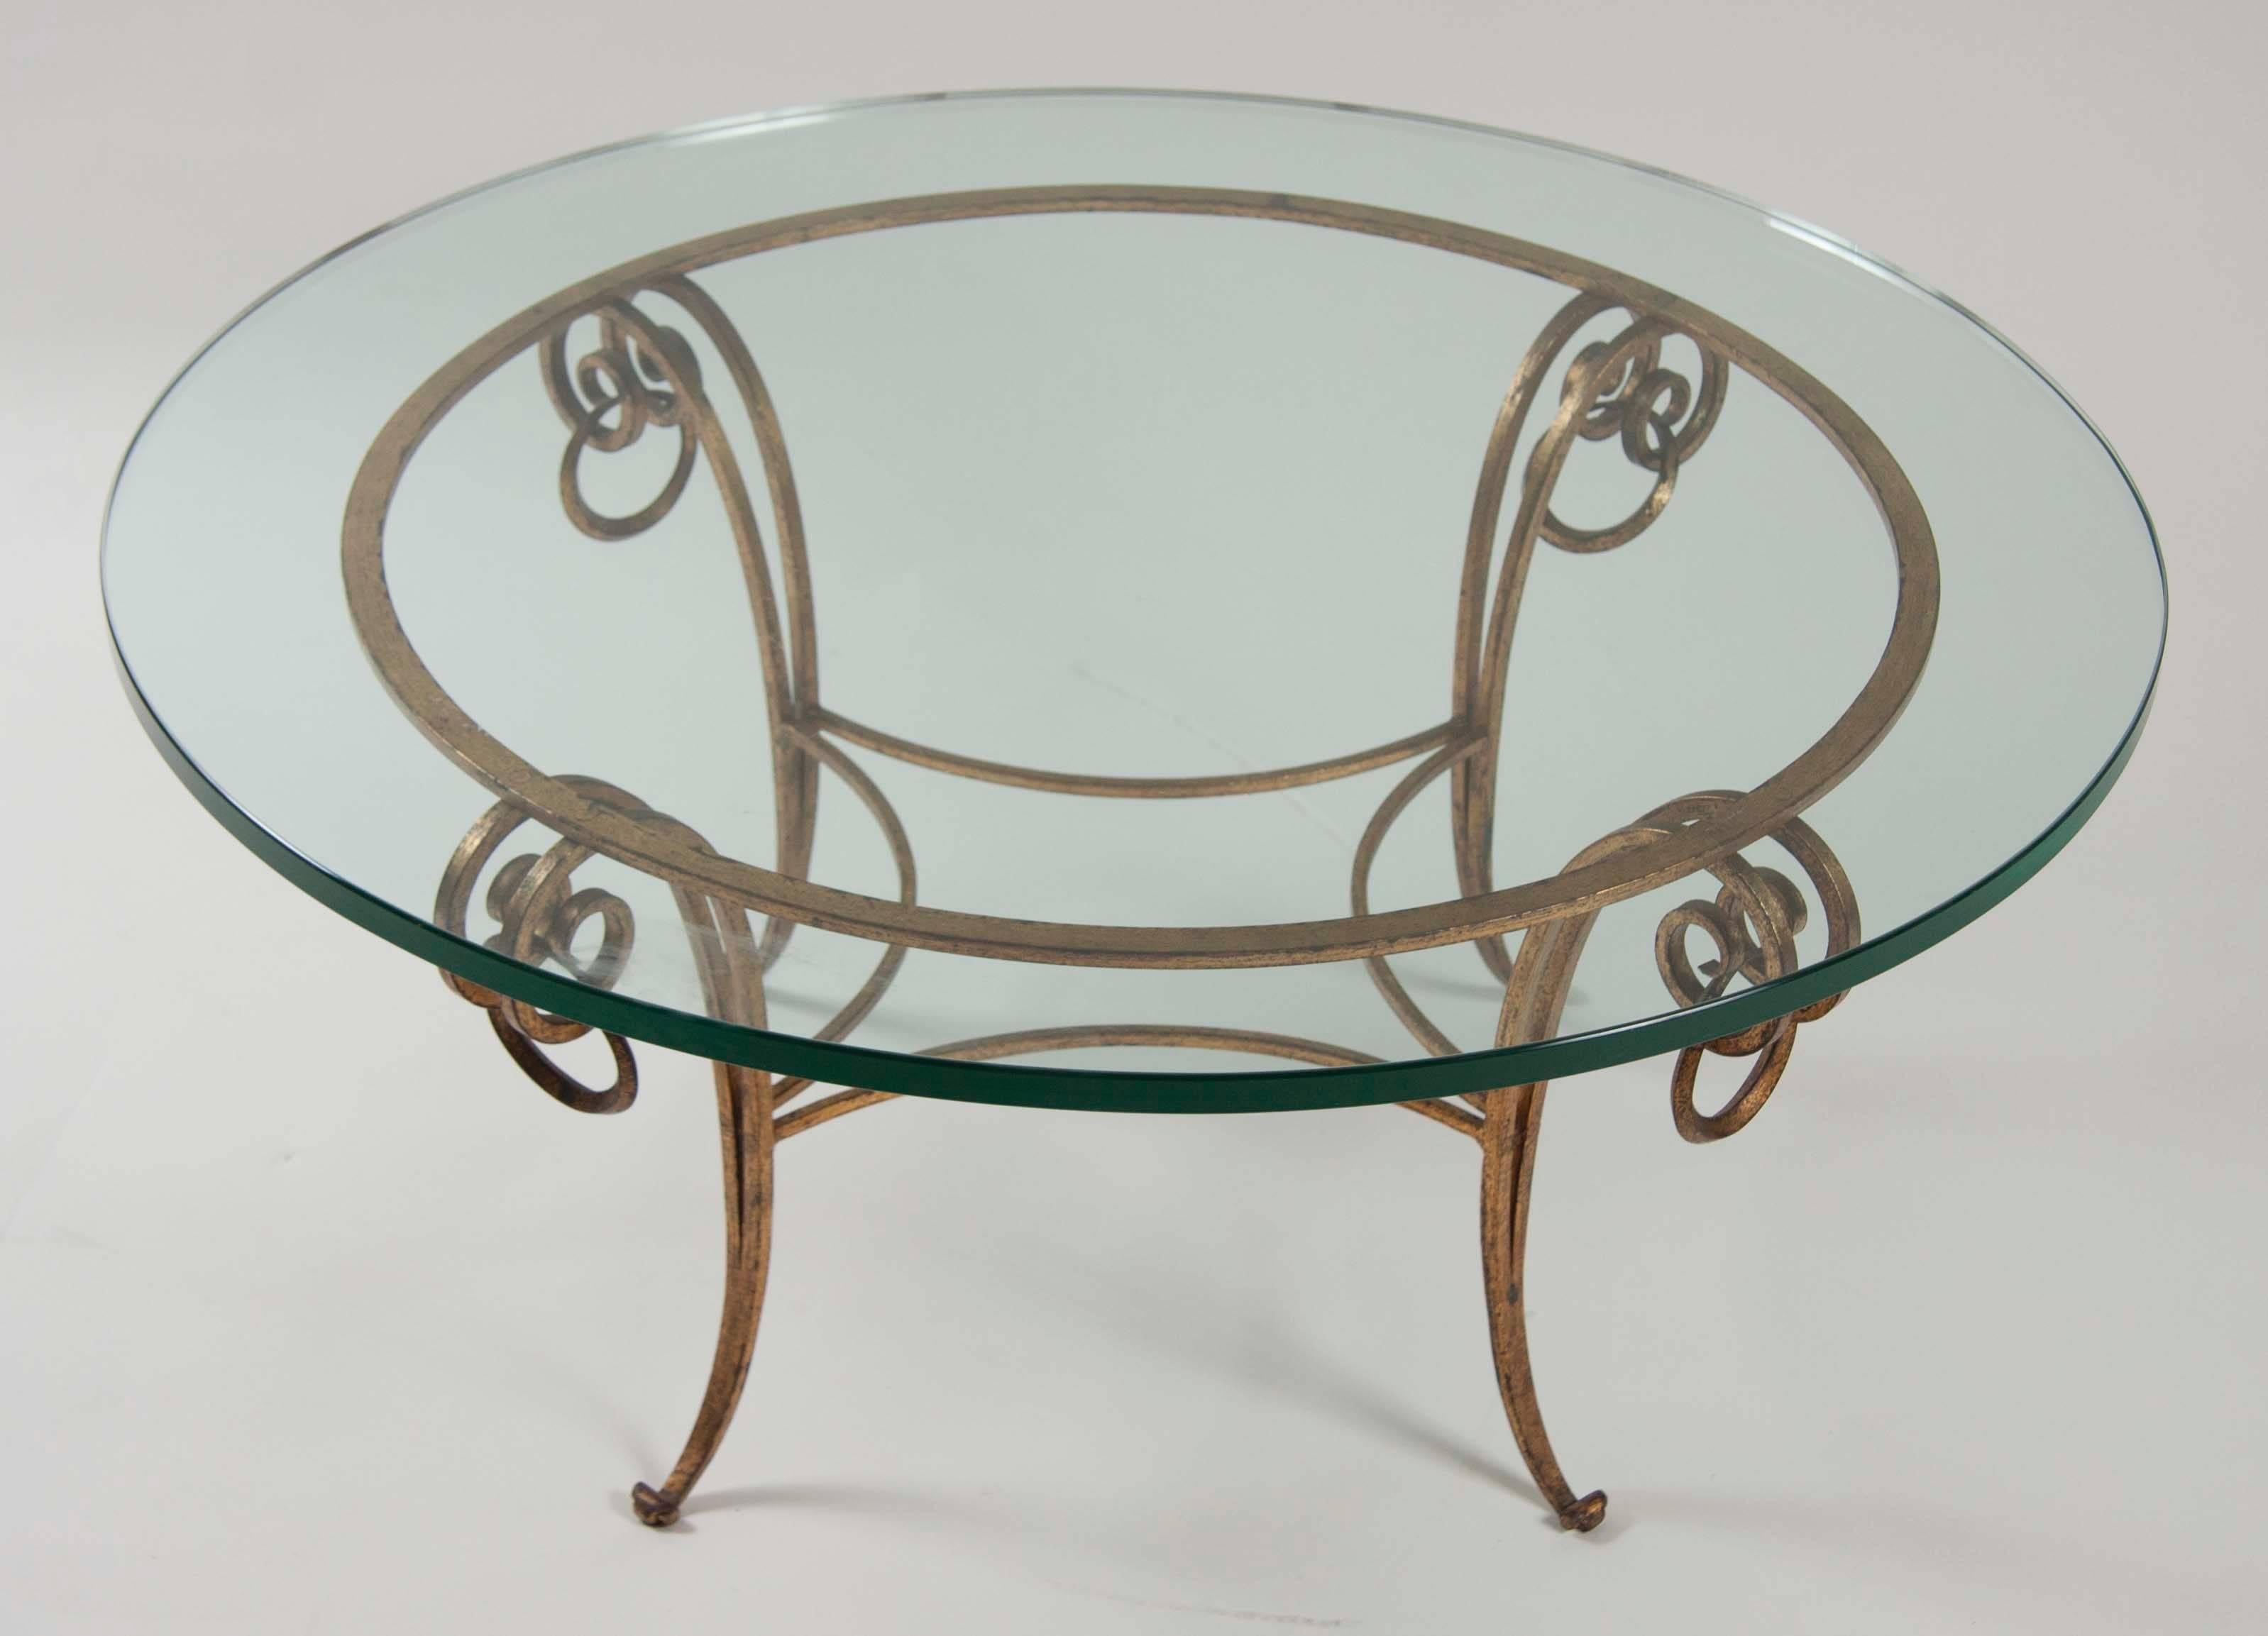 A gilt iron glass top coffee table in the manner of Rene Drouet, French.